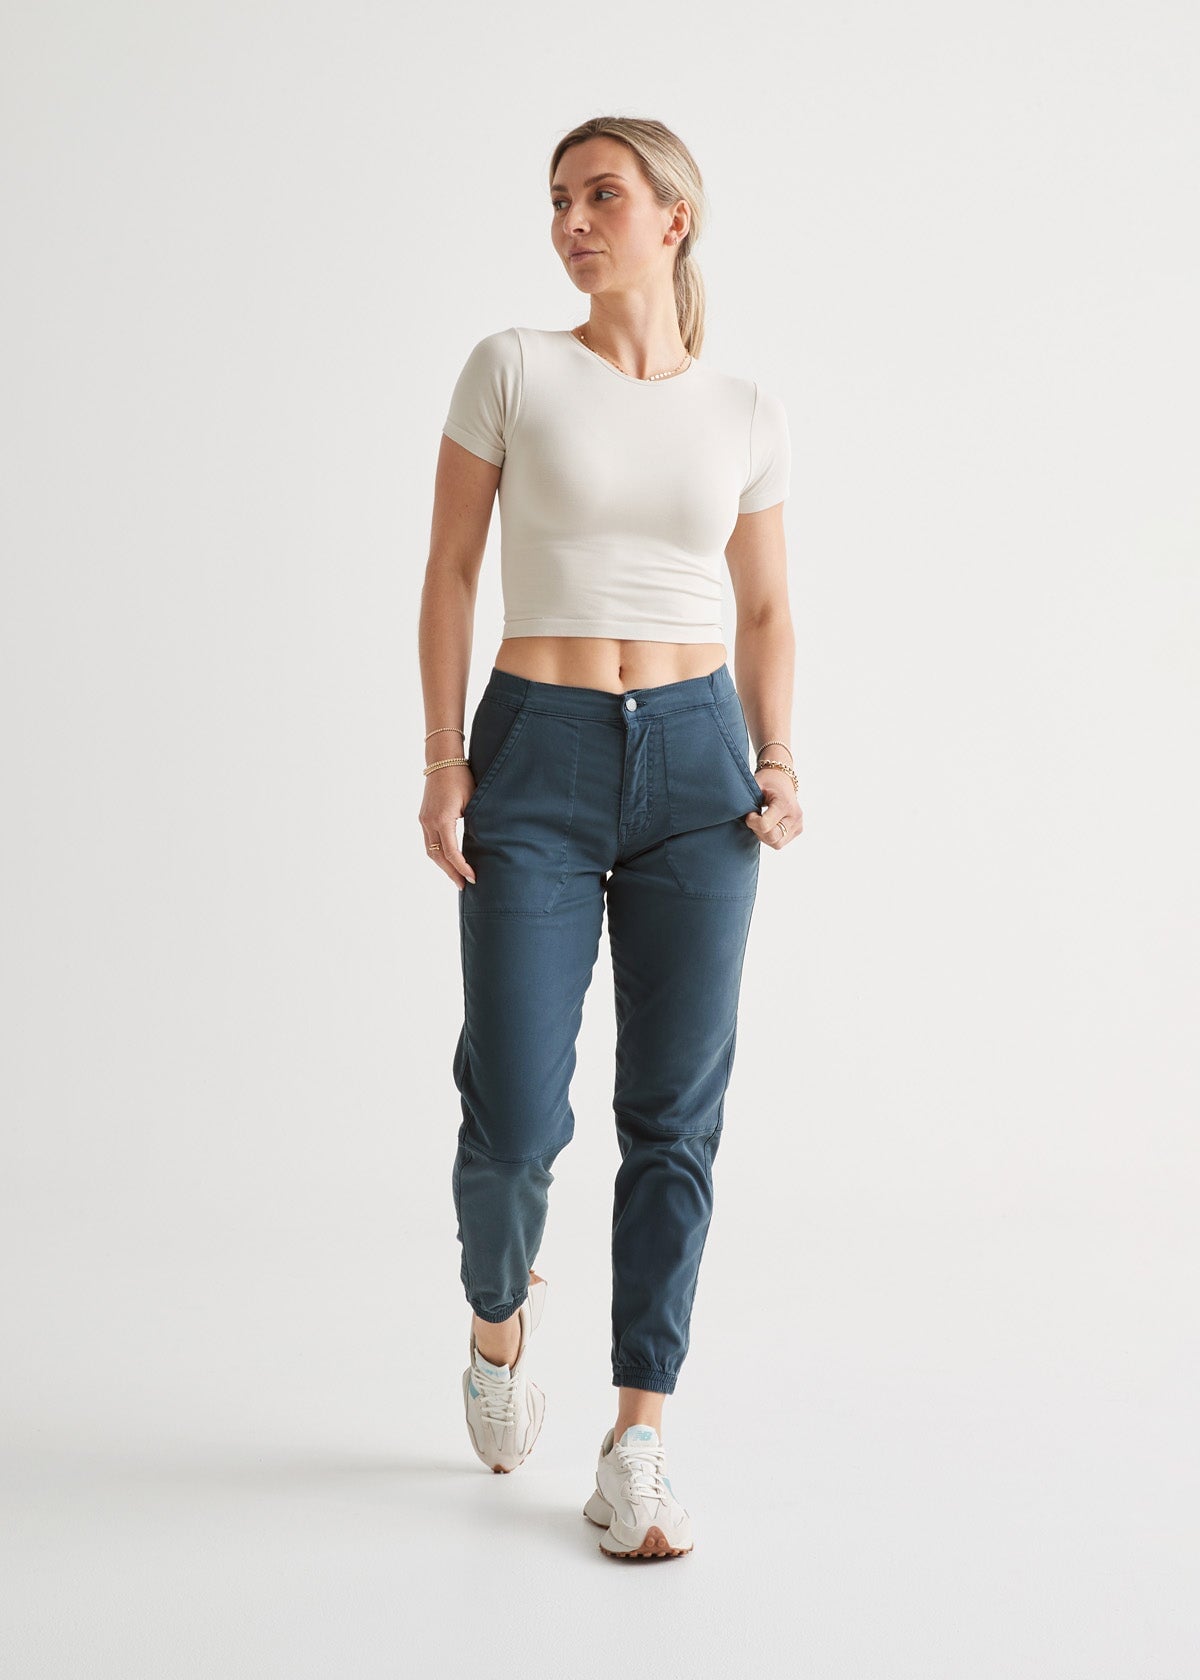 Women's High-rise Woven Ankle Jogger Pants - A New Day™ : Target